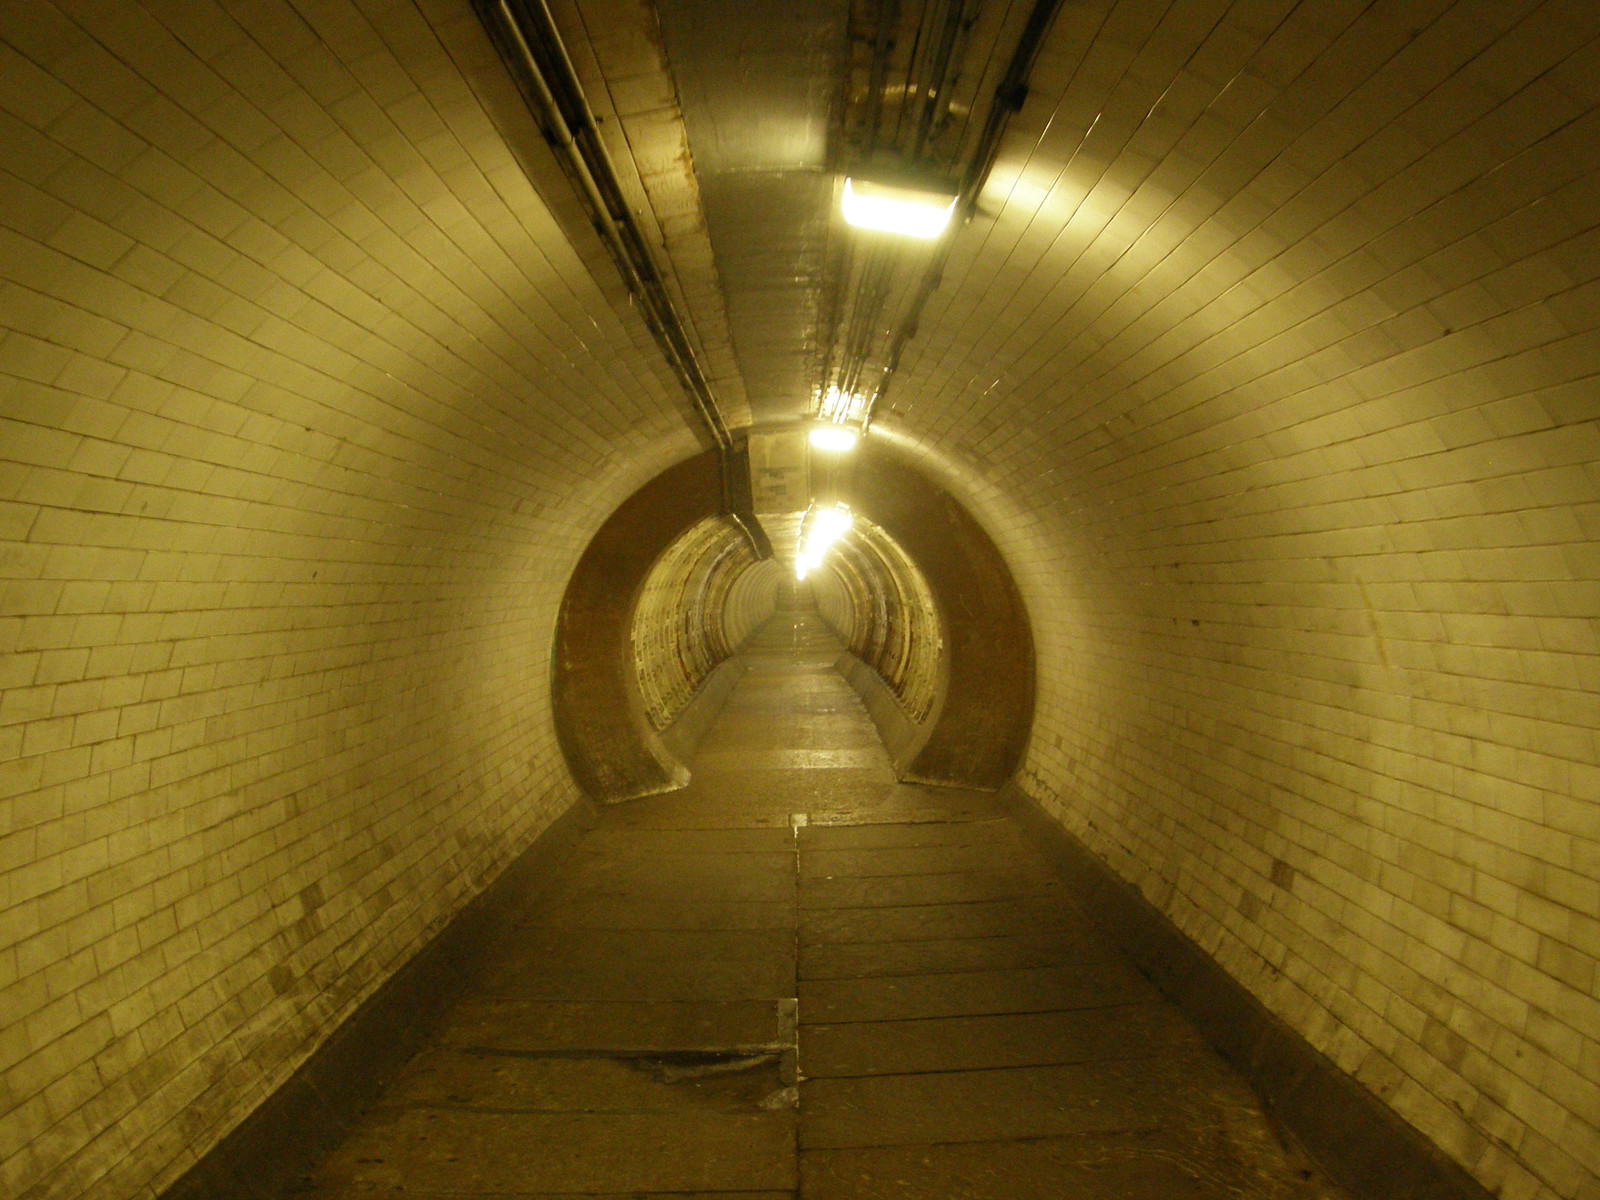 The Greenwich Foot Tunnel